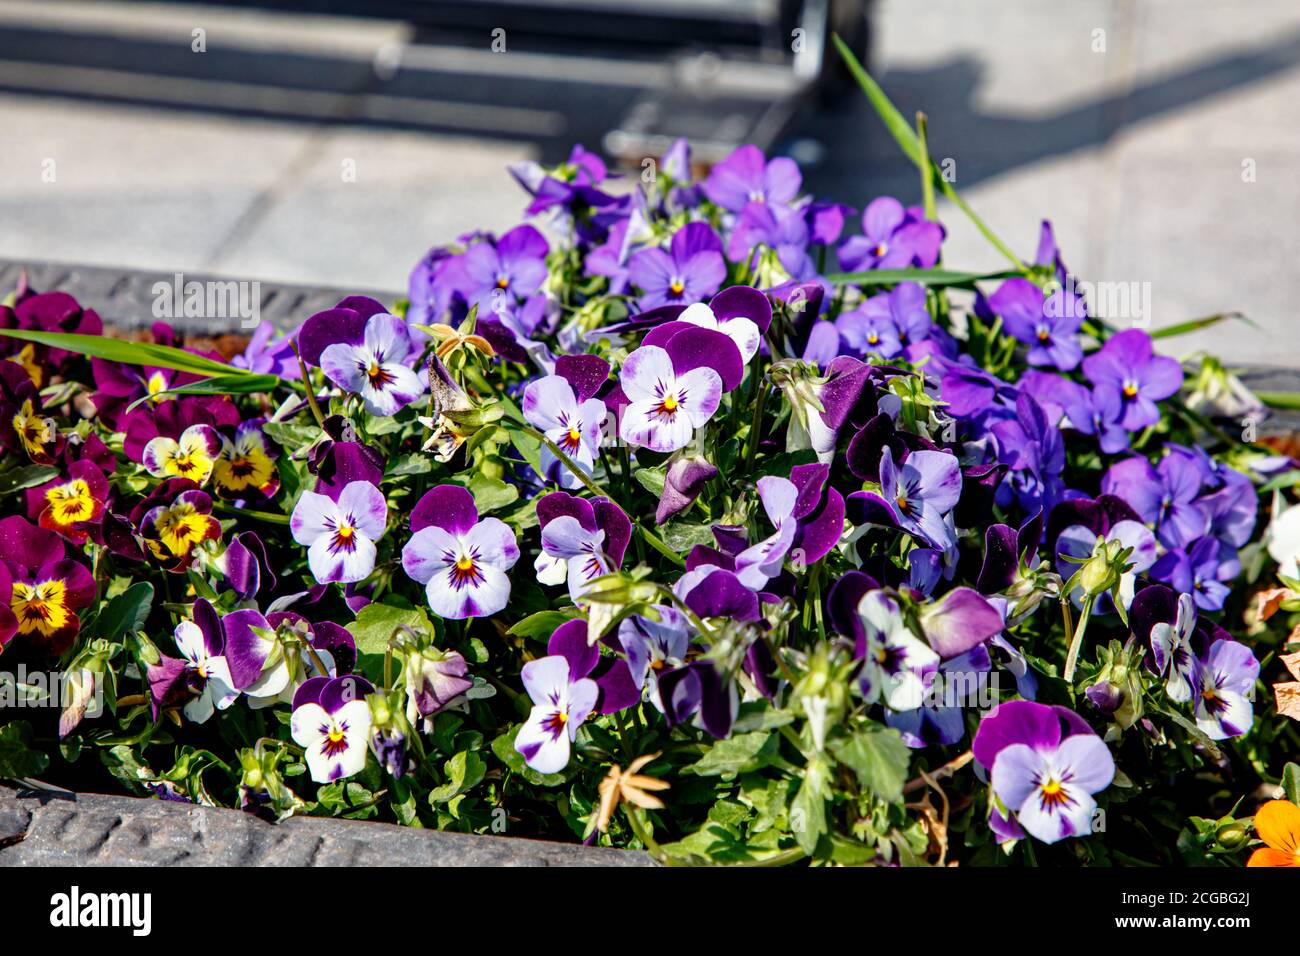 Flowerbed with lilac flowers pansies spring Stock Photo